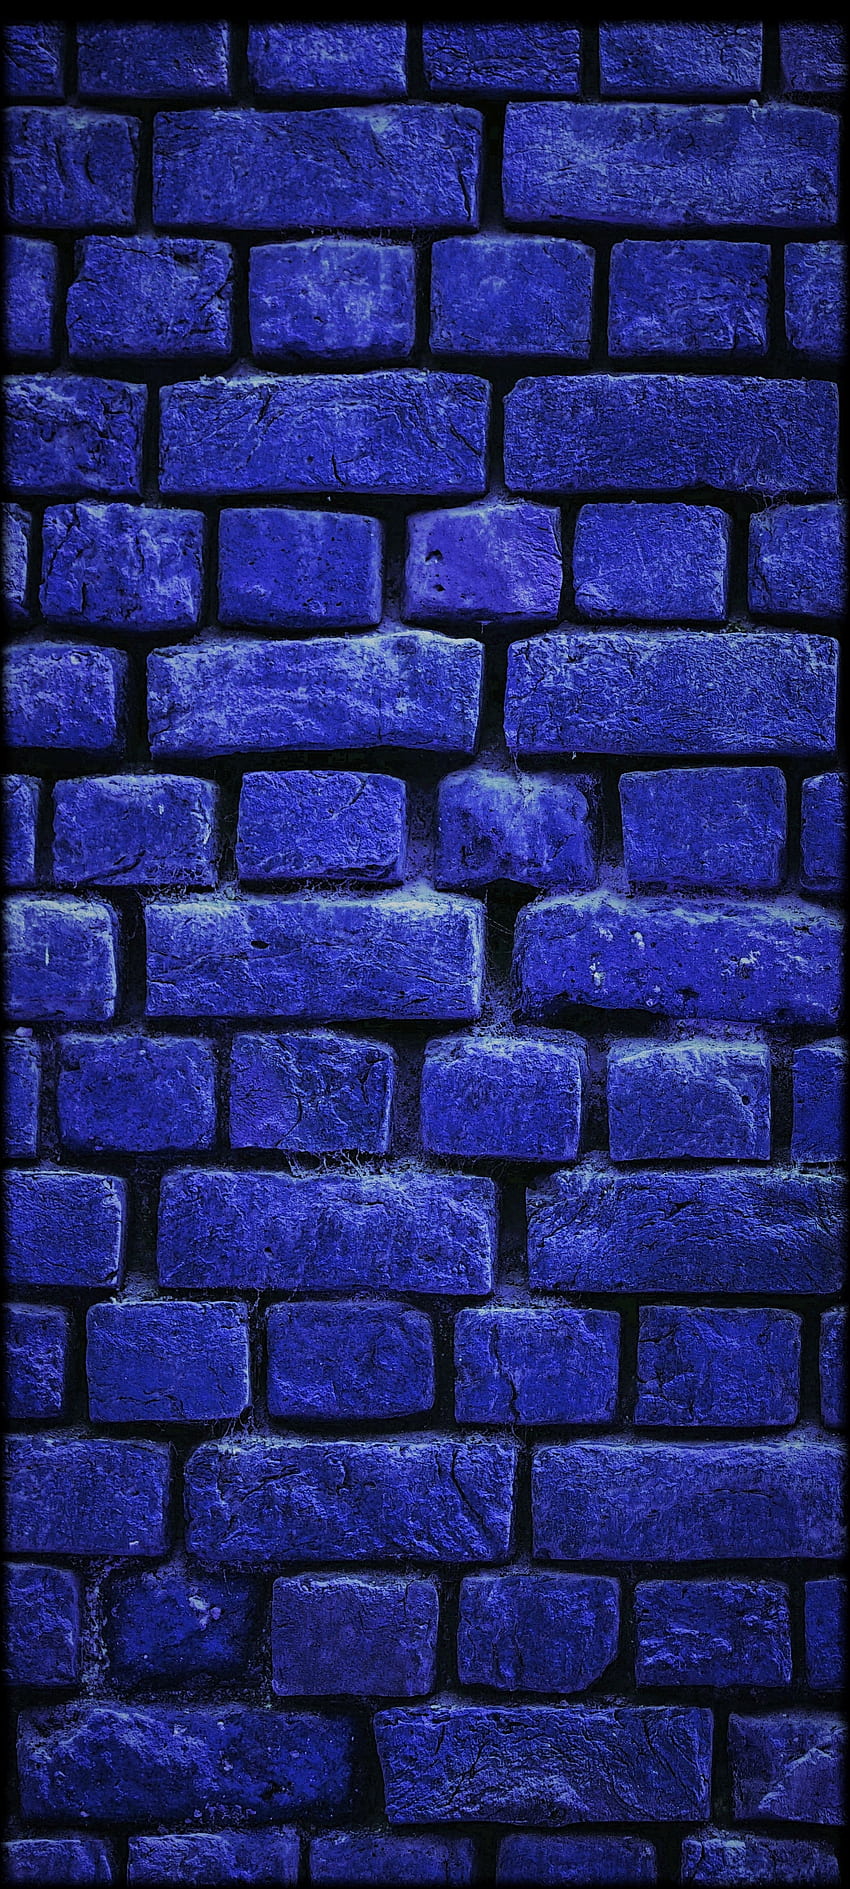 Bricks , iPhone, Basic, Galaxy, New, Art, iPhone 13, blue bricks, pattern, Cool, Modern, Surface, design, Smooth, locked, A51, Background, Galaxy S21, Druffix, 2021, M32, Magma, Android, Acer, No1, Apple, Colors, S10, Galaxy A32, Love, LG, Samsung, Edge, Nokia, Original, Smartphone HD phone wallpaper